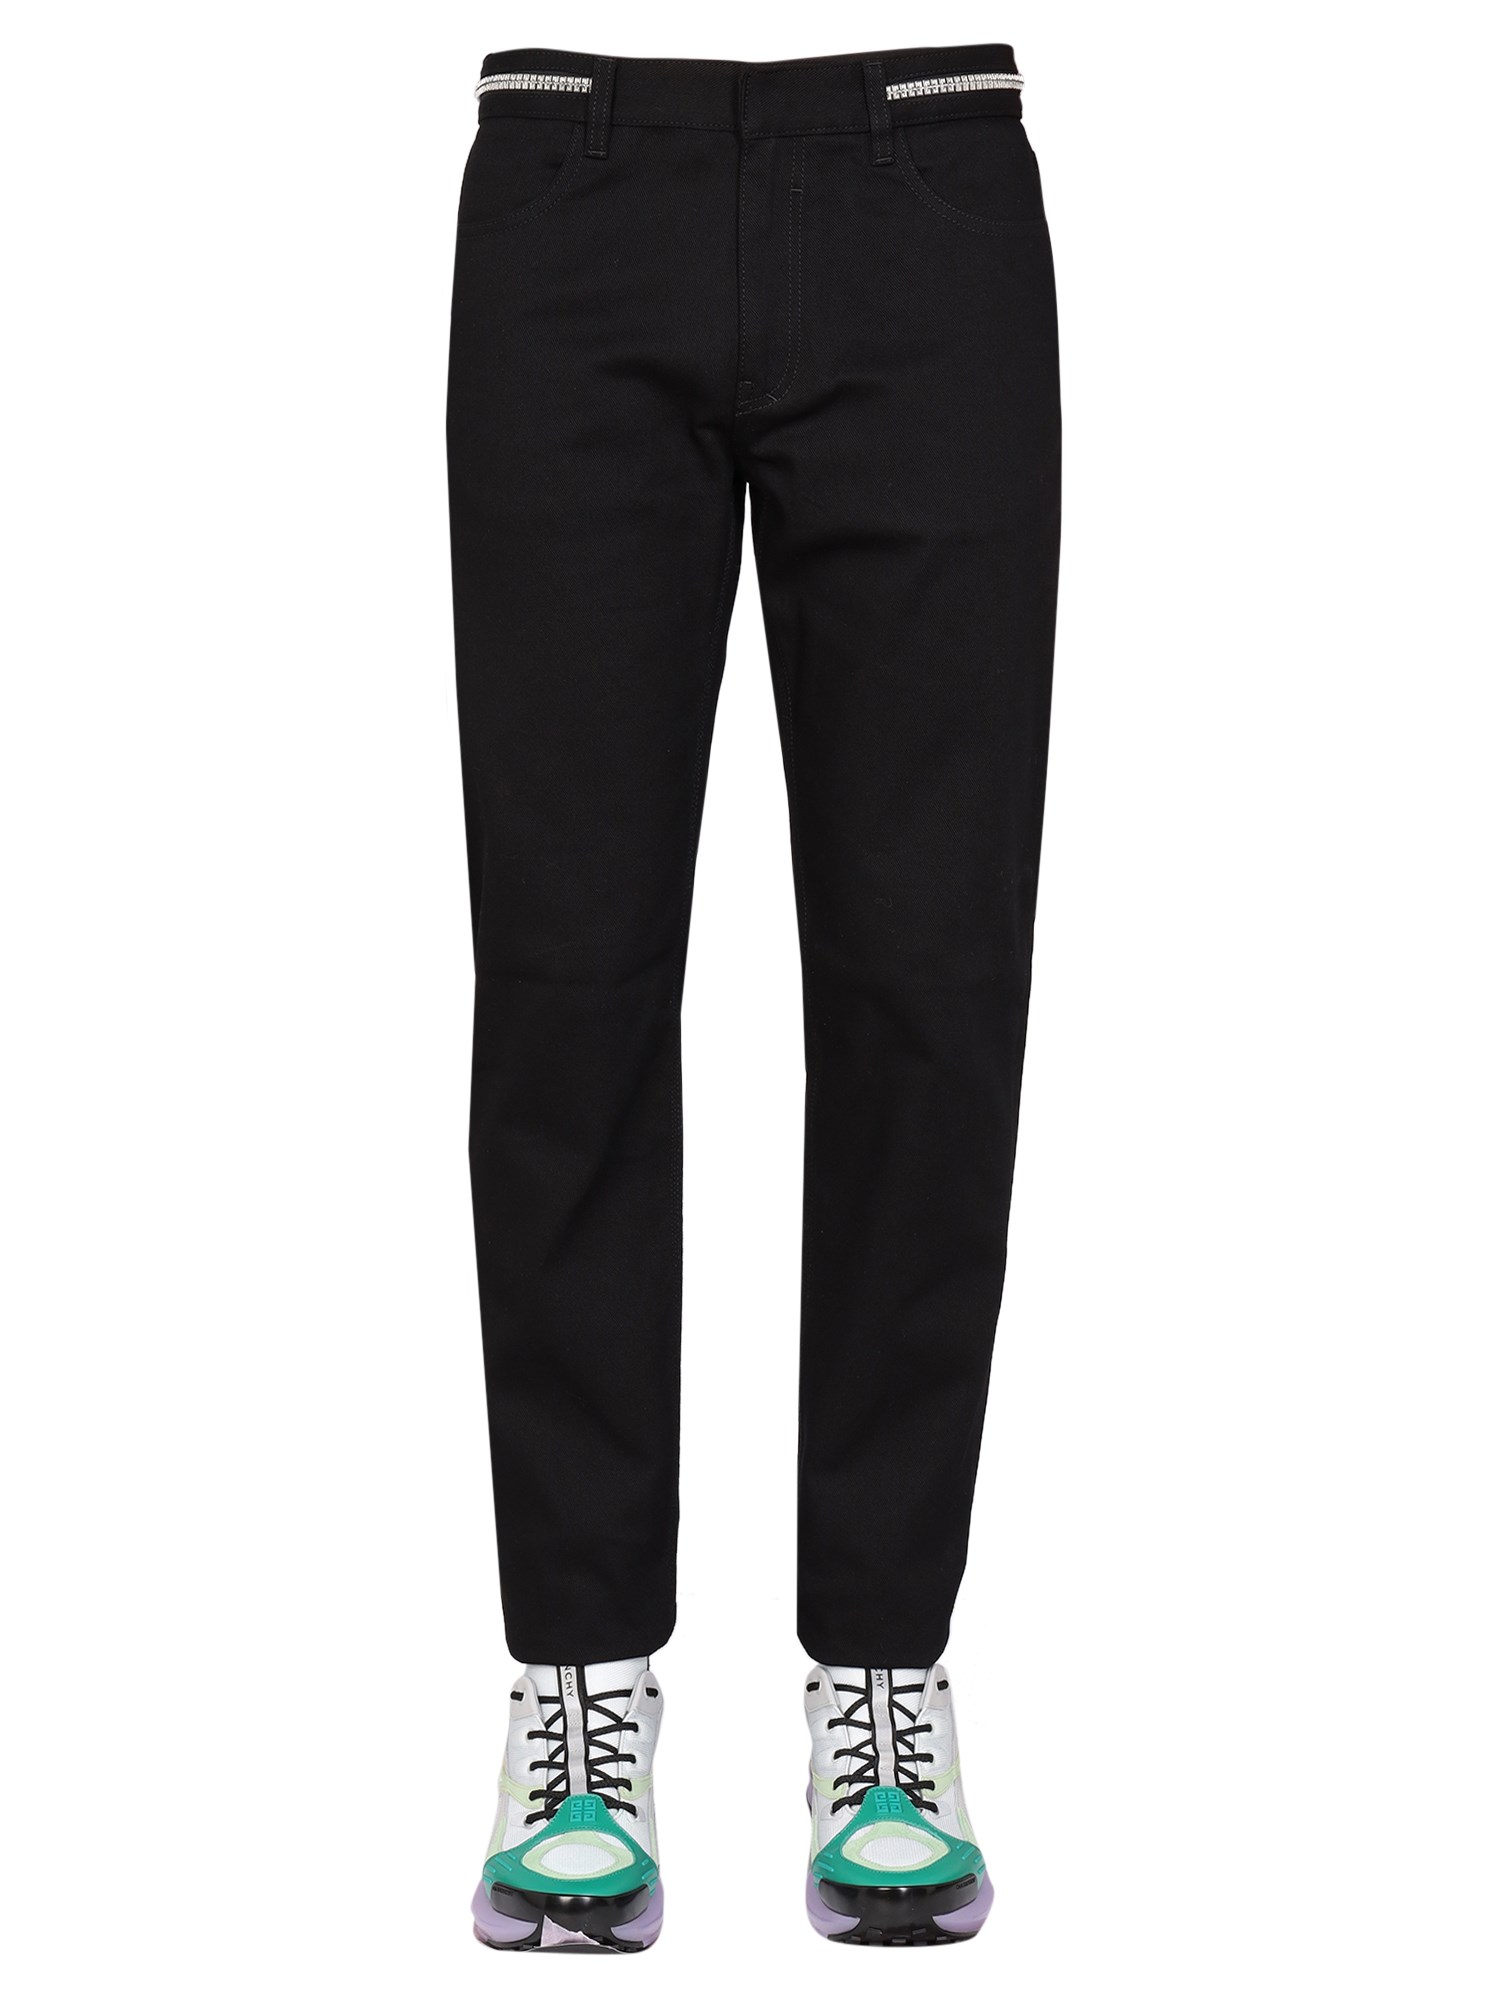 givenchy slim fit jeans with metallic details